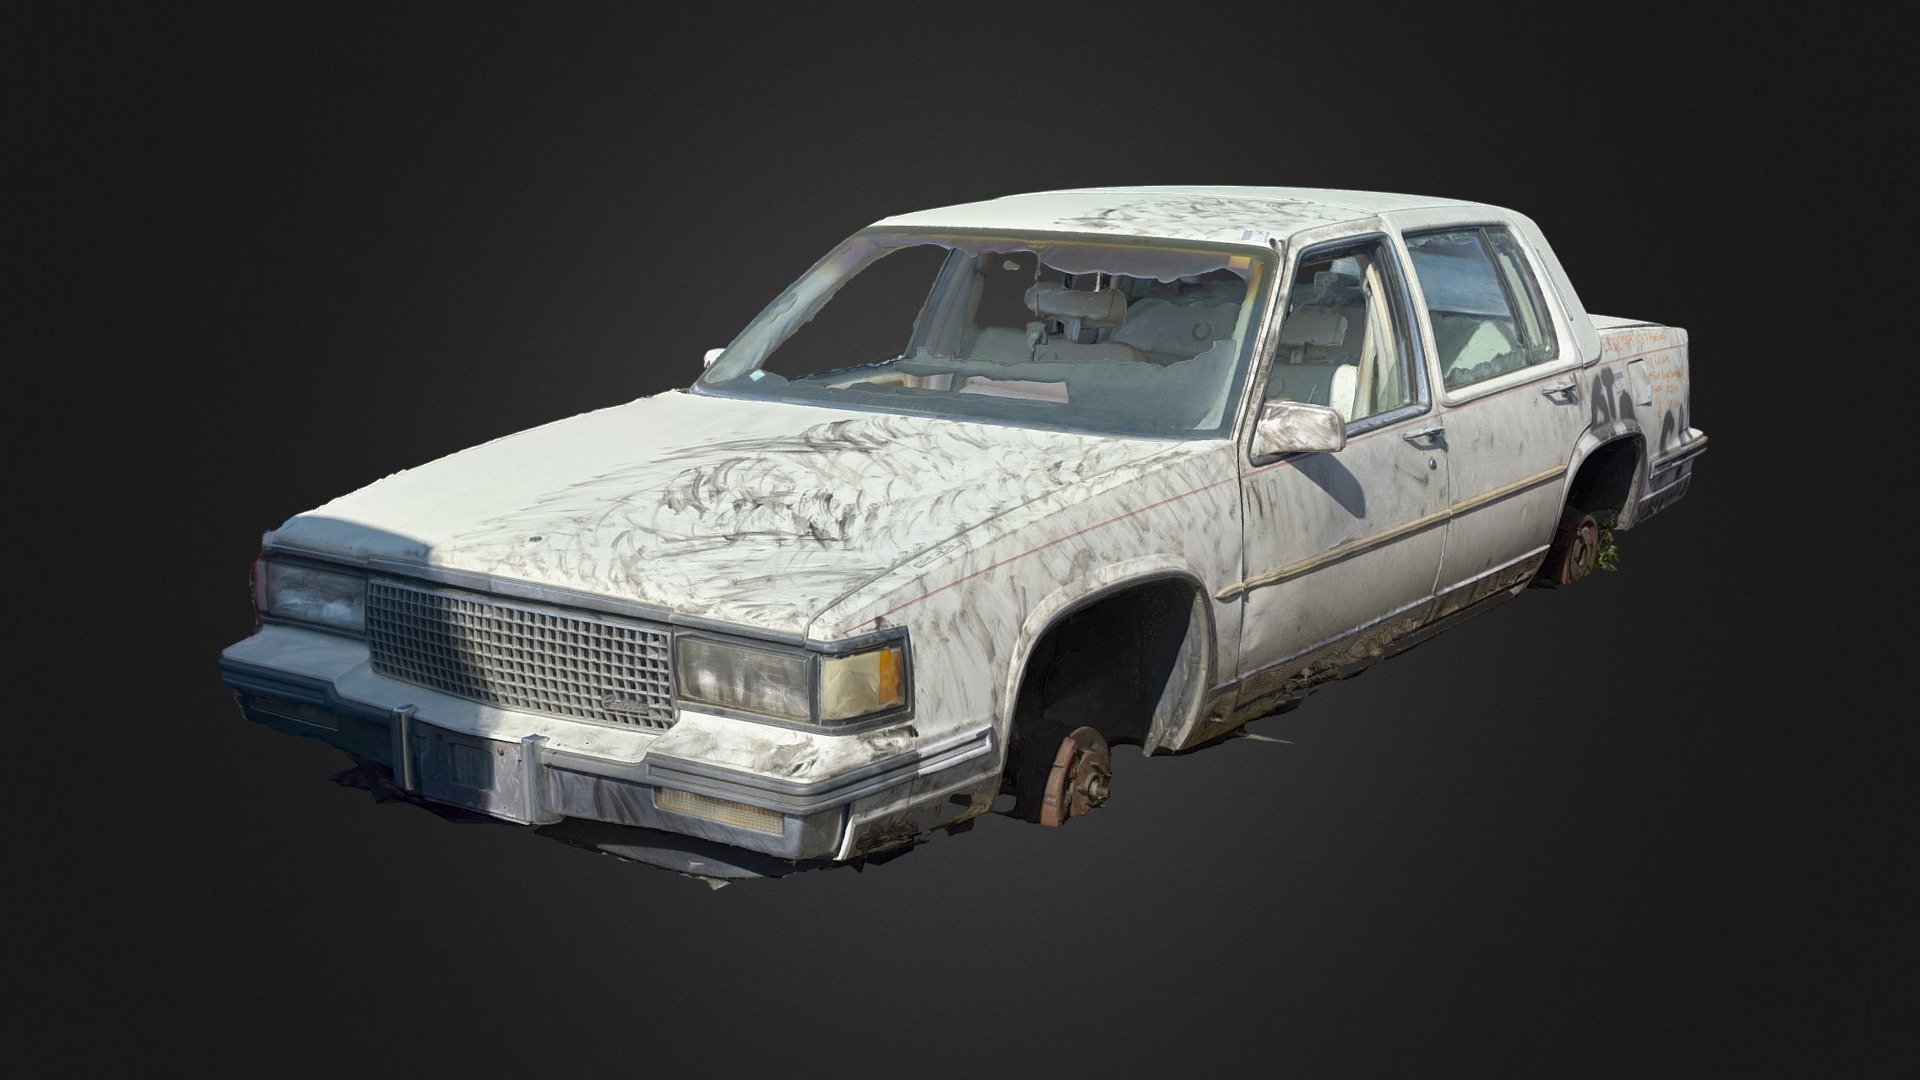 High-accuracy photoscan Intended for use as modeling reference.

Photos taken with my Nikon D3400 and polarizing filter

Created in RealityCapture from 992 images - 1987-1988 Fleetwood [Scan] - 3D model by Rush_Freak 3d model